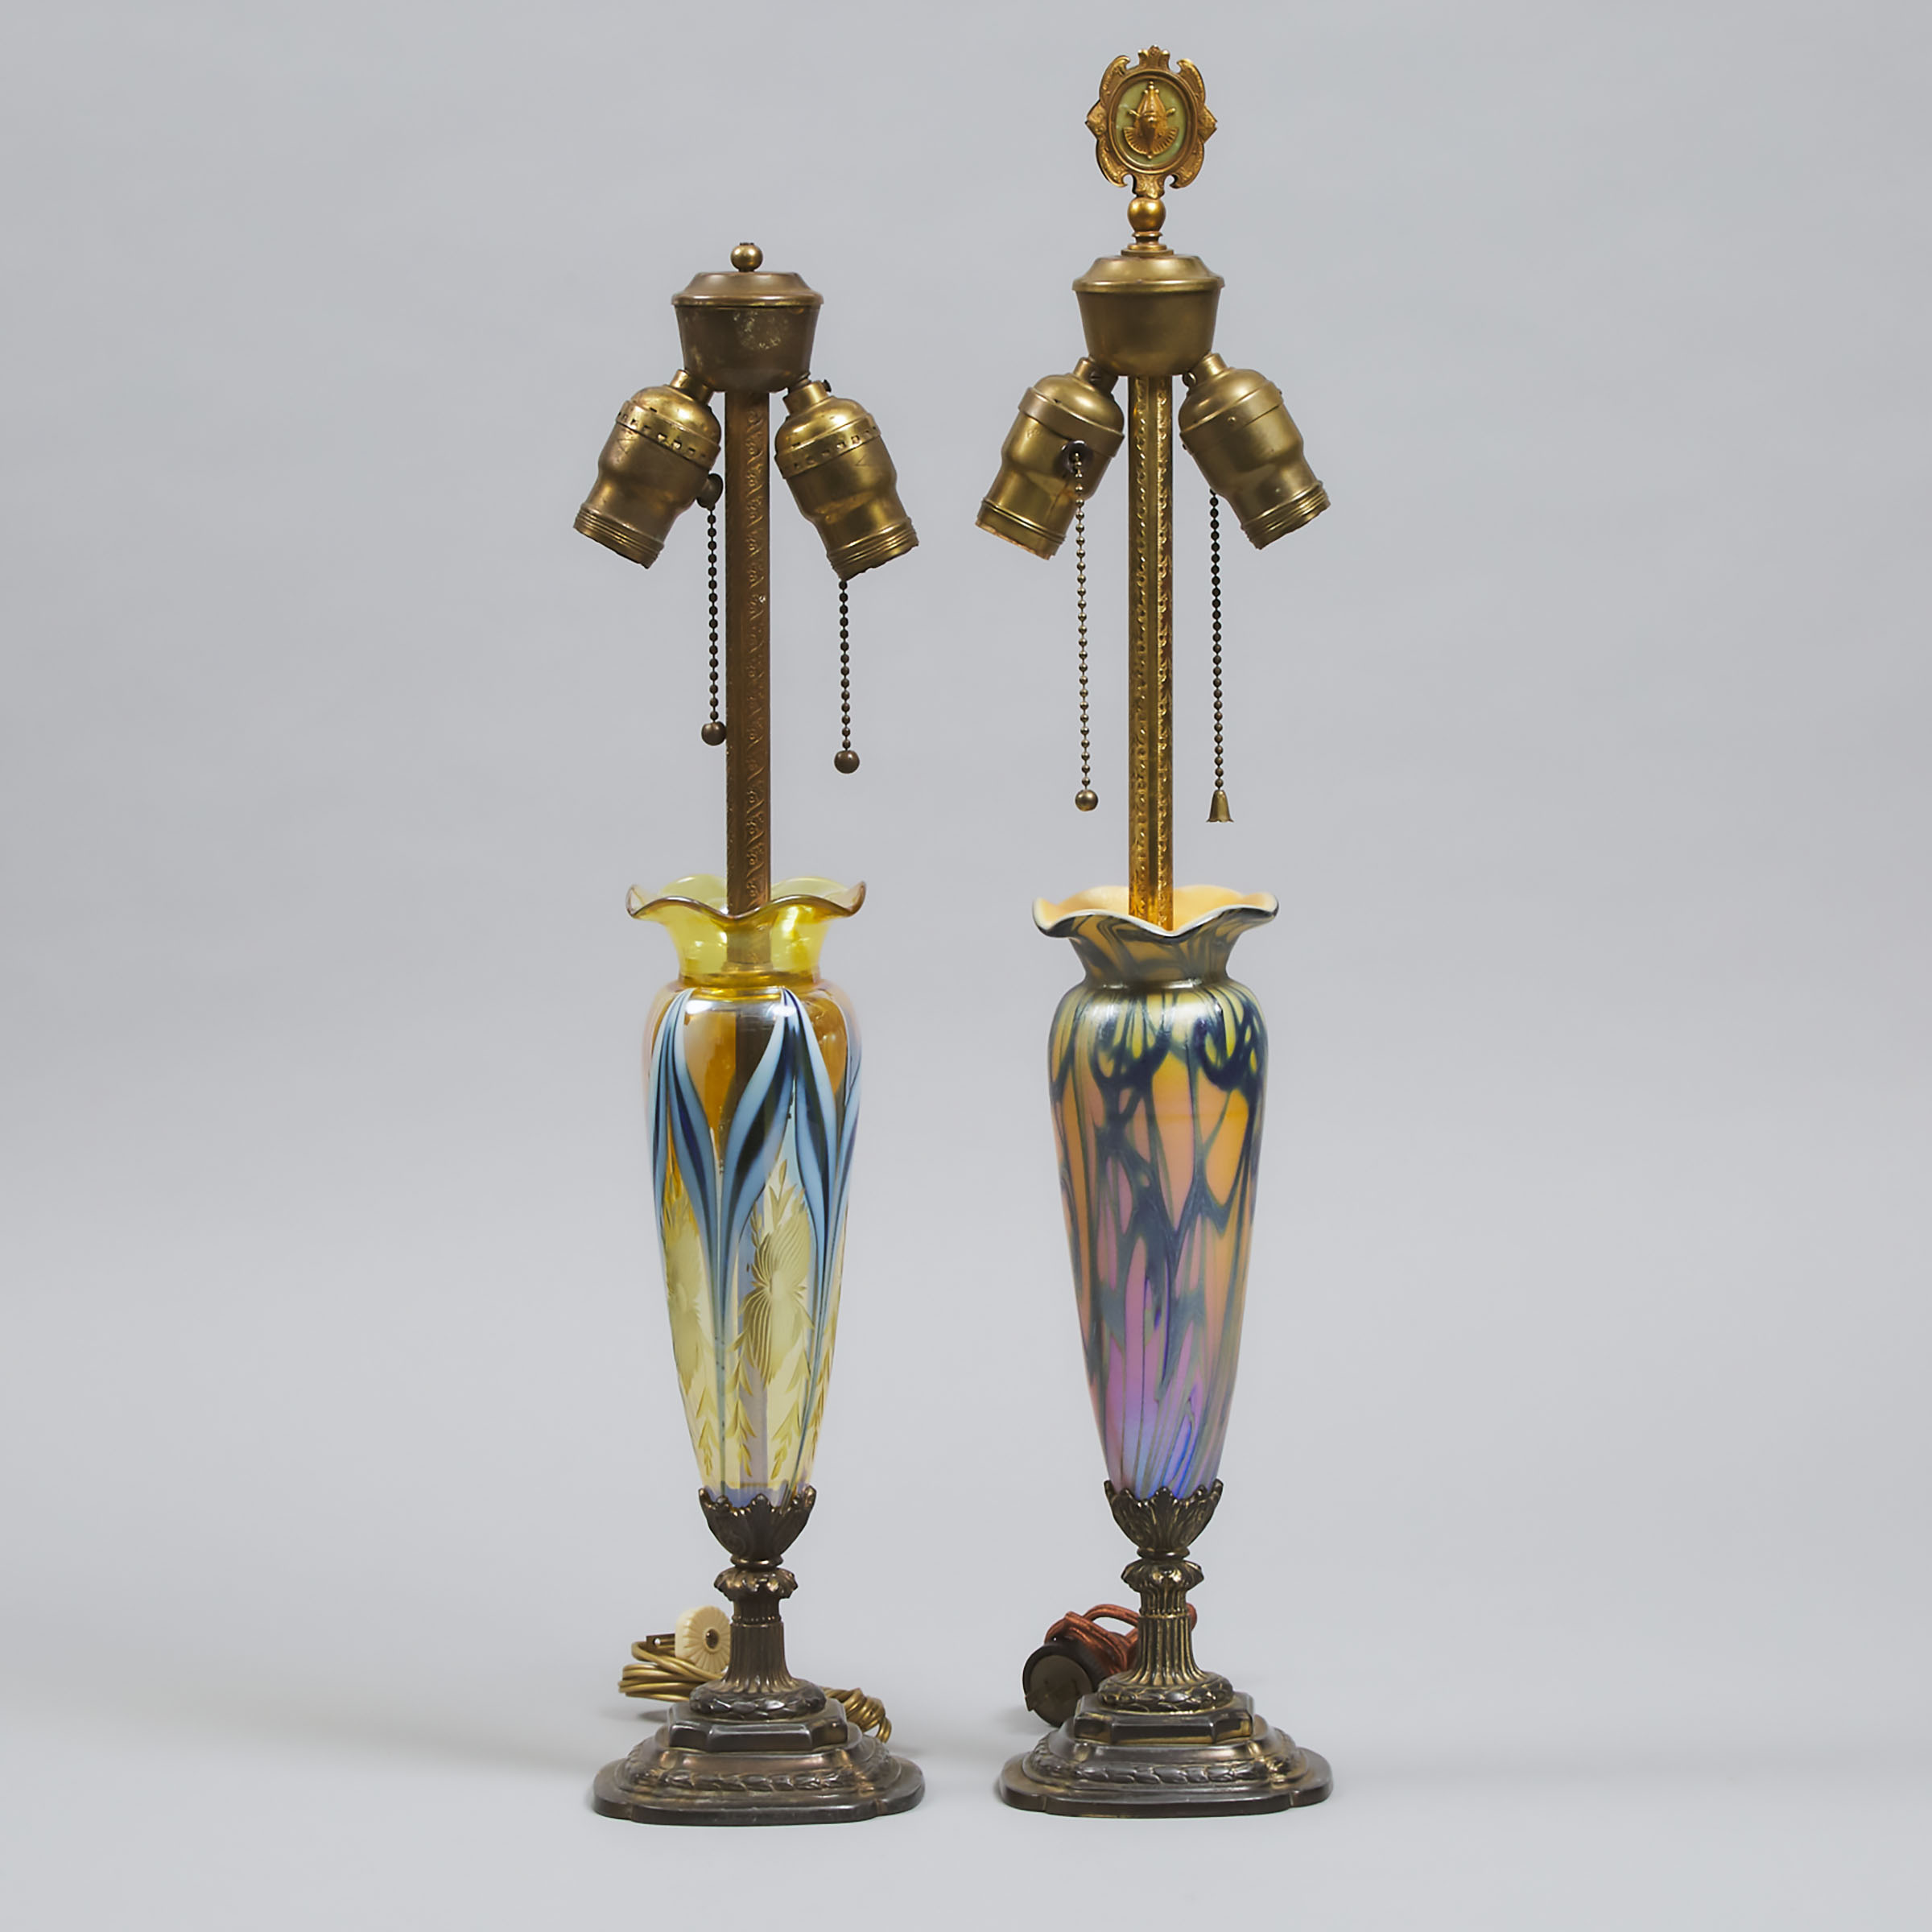 Near Pair of American Art Glass and Gilt Metal Table Lamps, probably Quezal or Durand, early 20th century